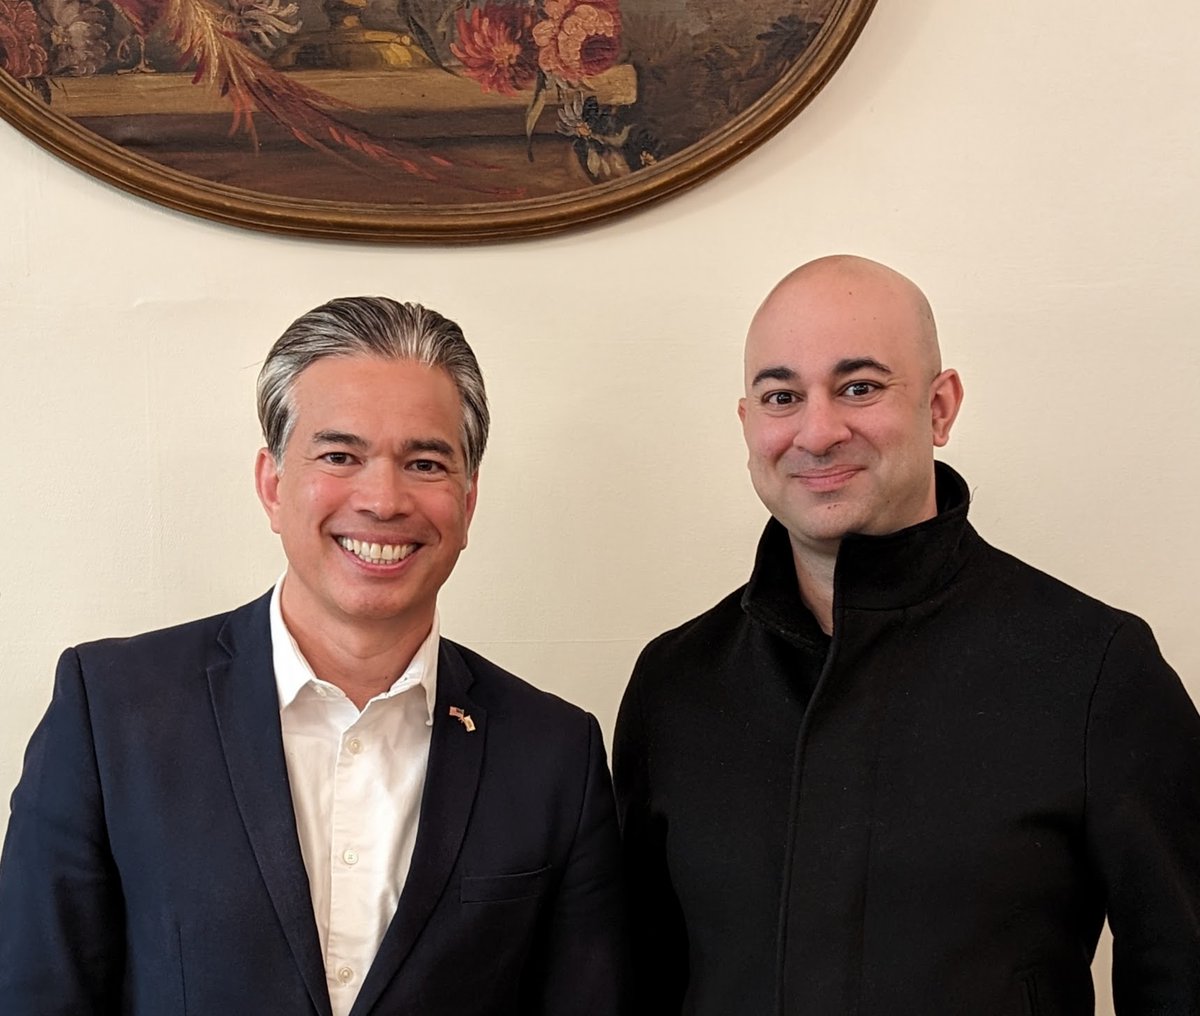 I am honored to announce that CA Attorney General @RobBonta has endorsed my campaign for SF Supervisor. I have looked up to Bonta for years as a pro housing progressive leader who has fought for housing equity and against obstructionism. We must do the same here in D5.